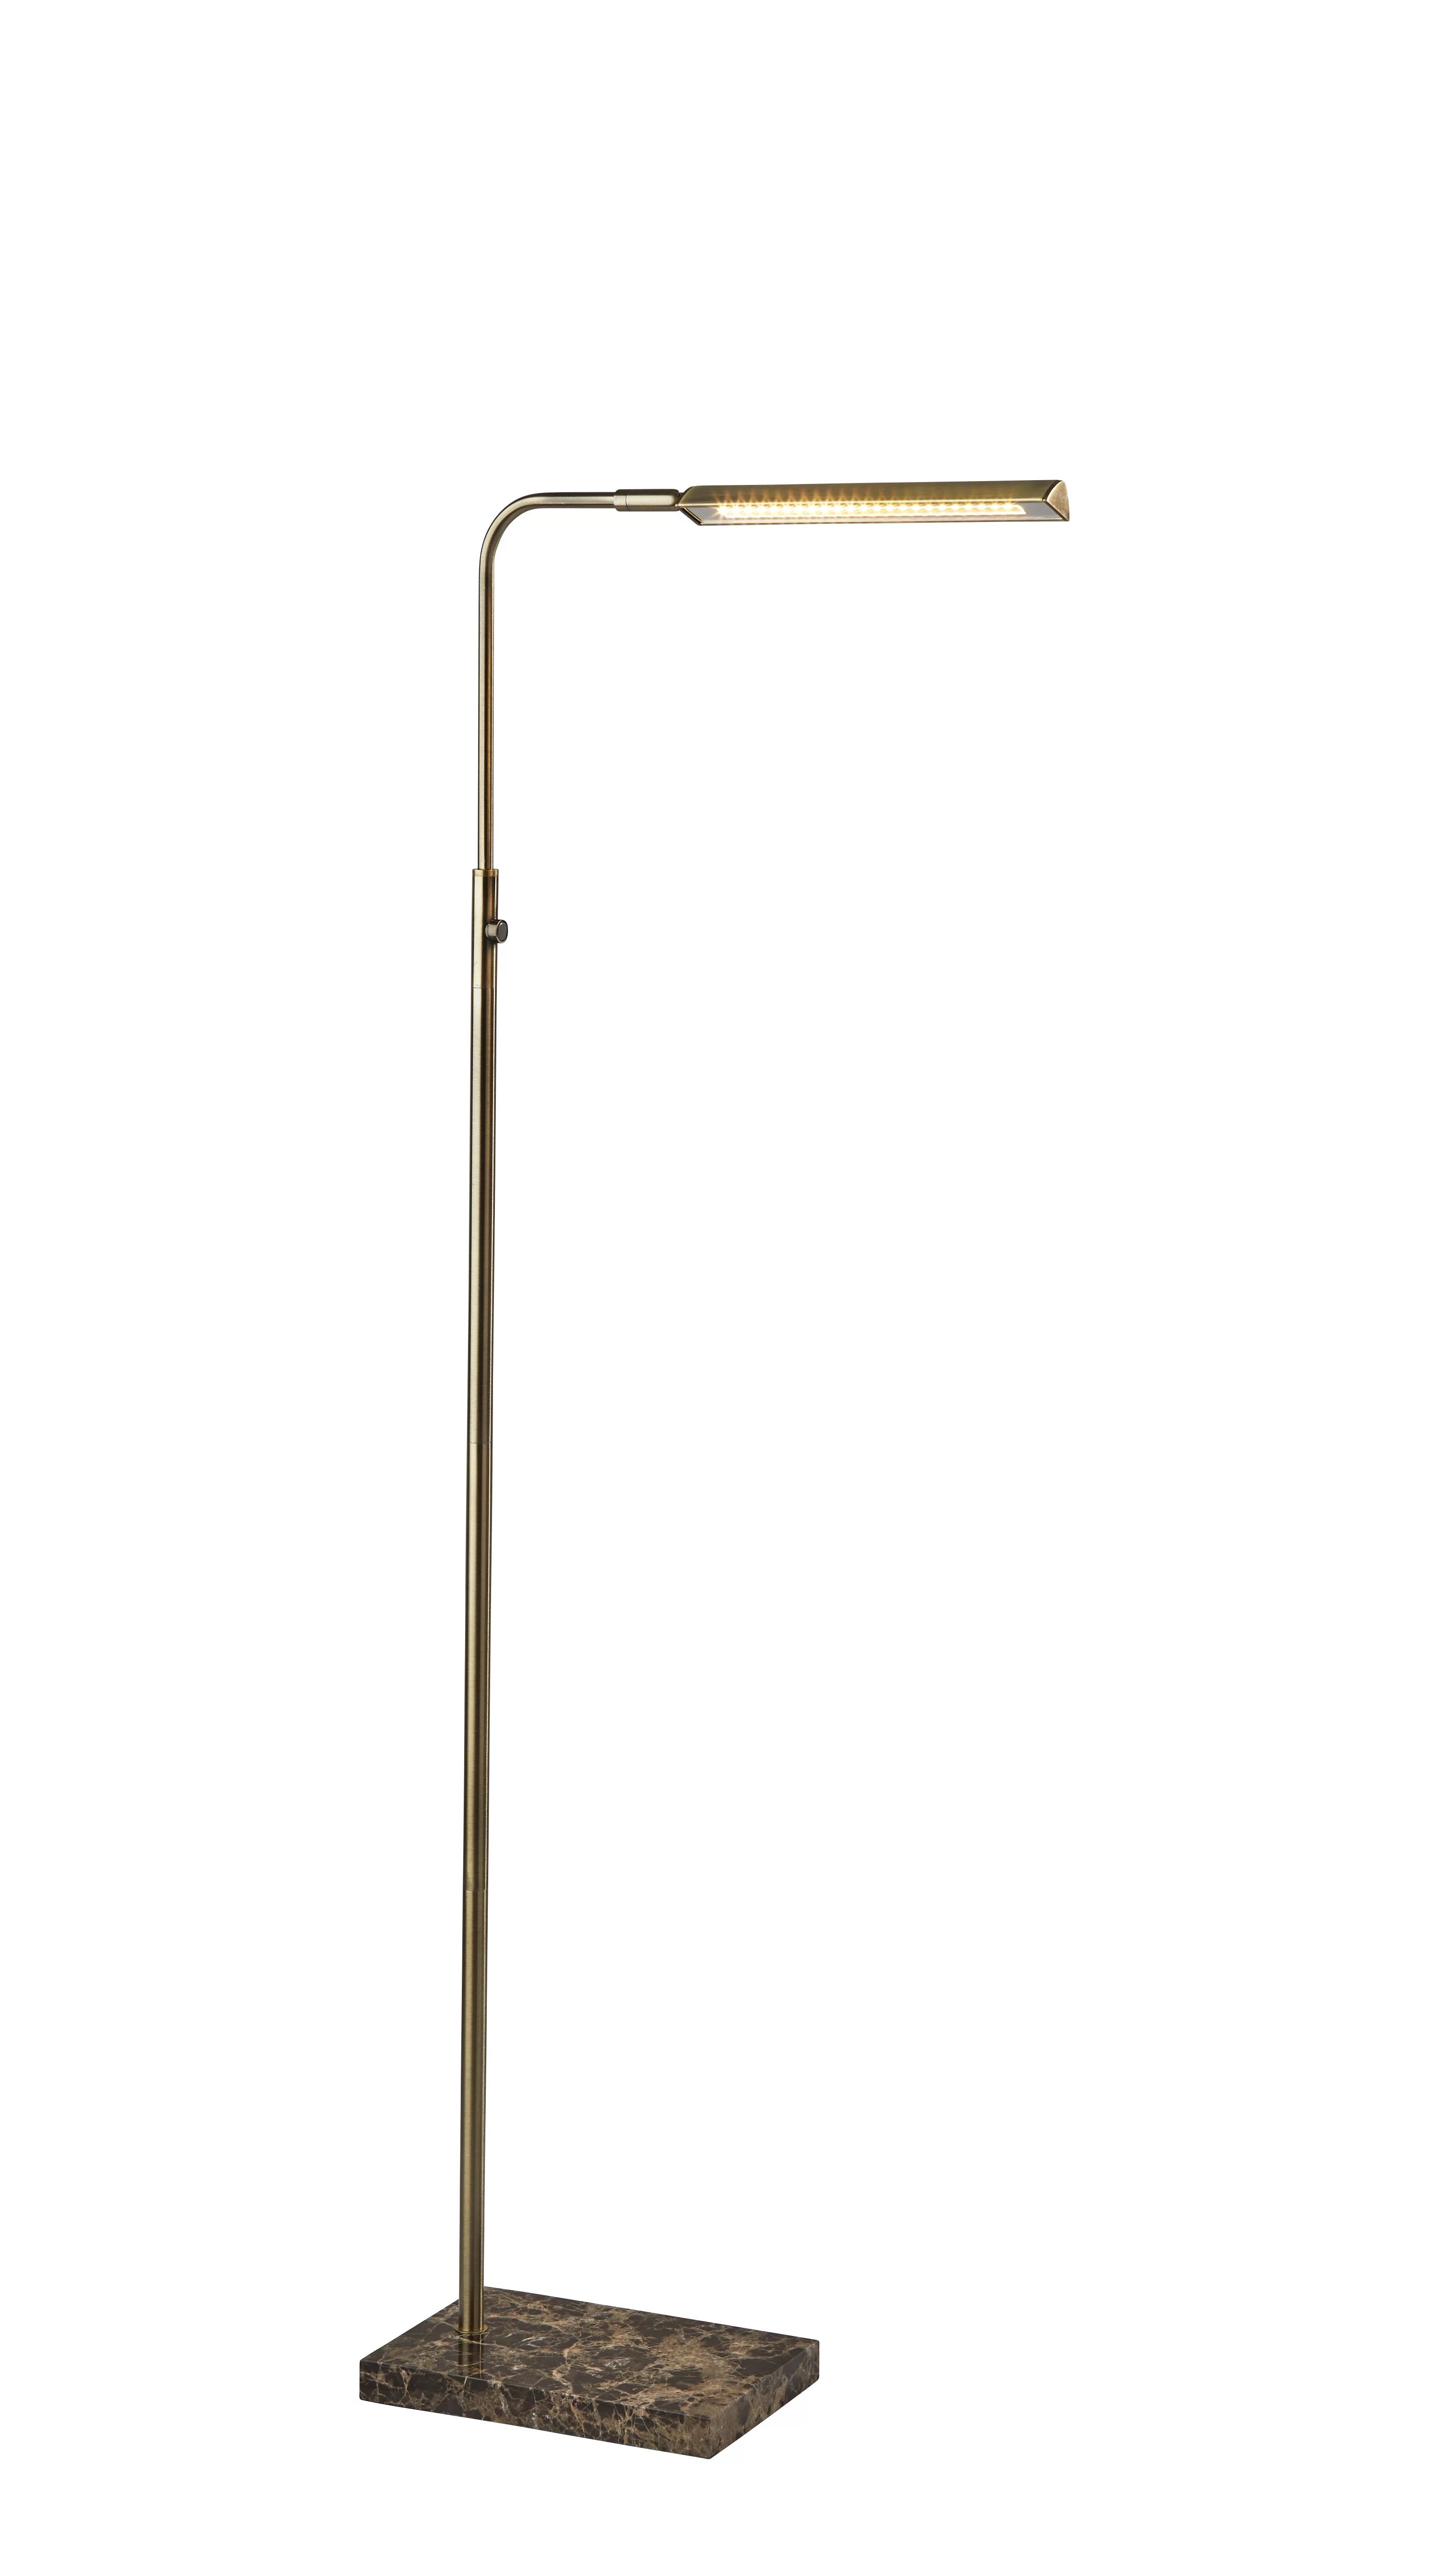 Reader LED Floor Lamp with Antique Brass Finish | Walmart (US)